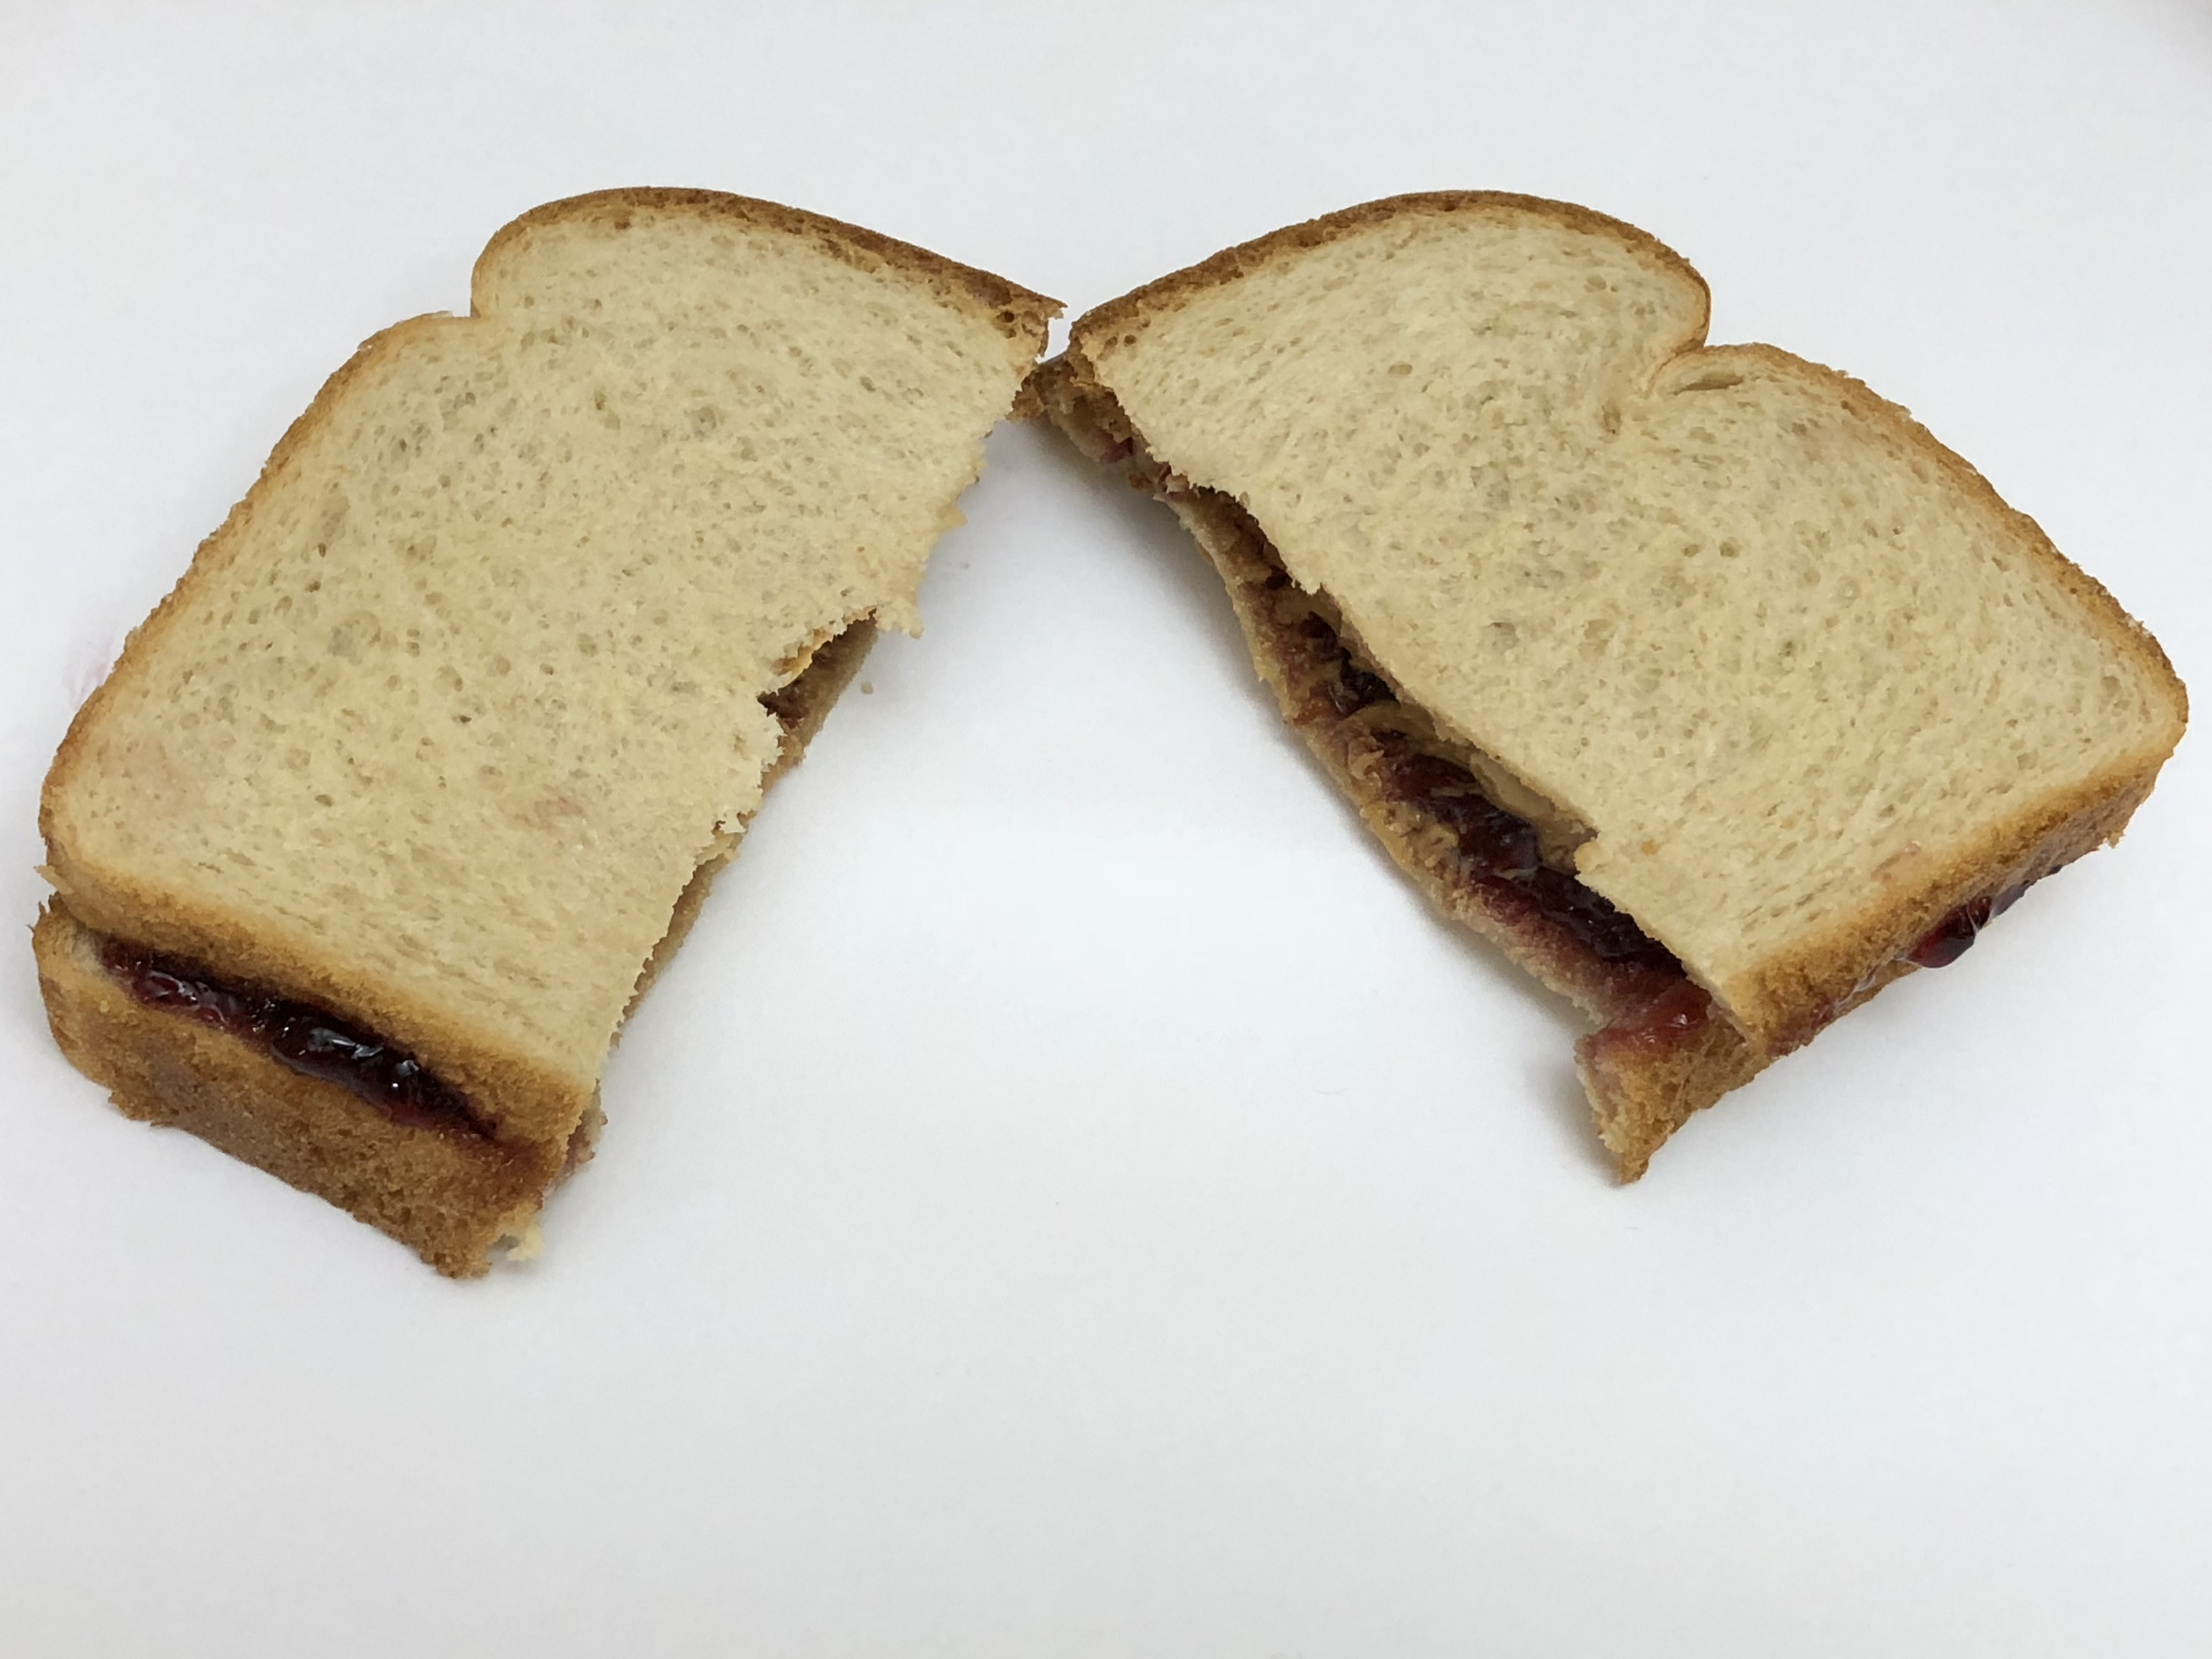 File 05 04 23 52 06 A Peanut Butter And Jelly Sandwich Cut In Two